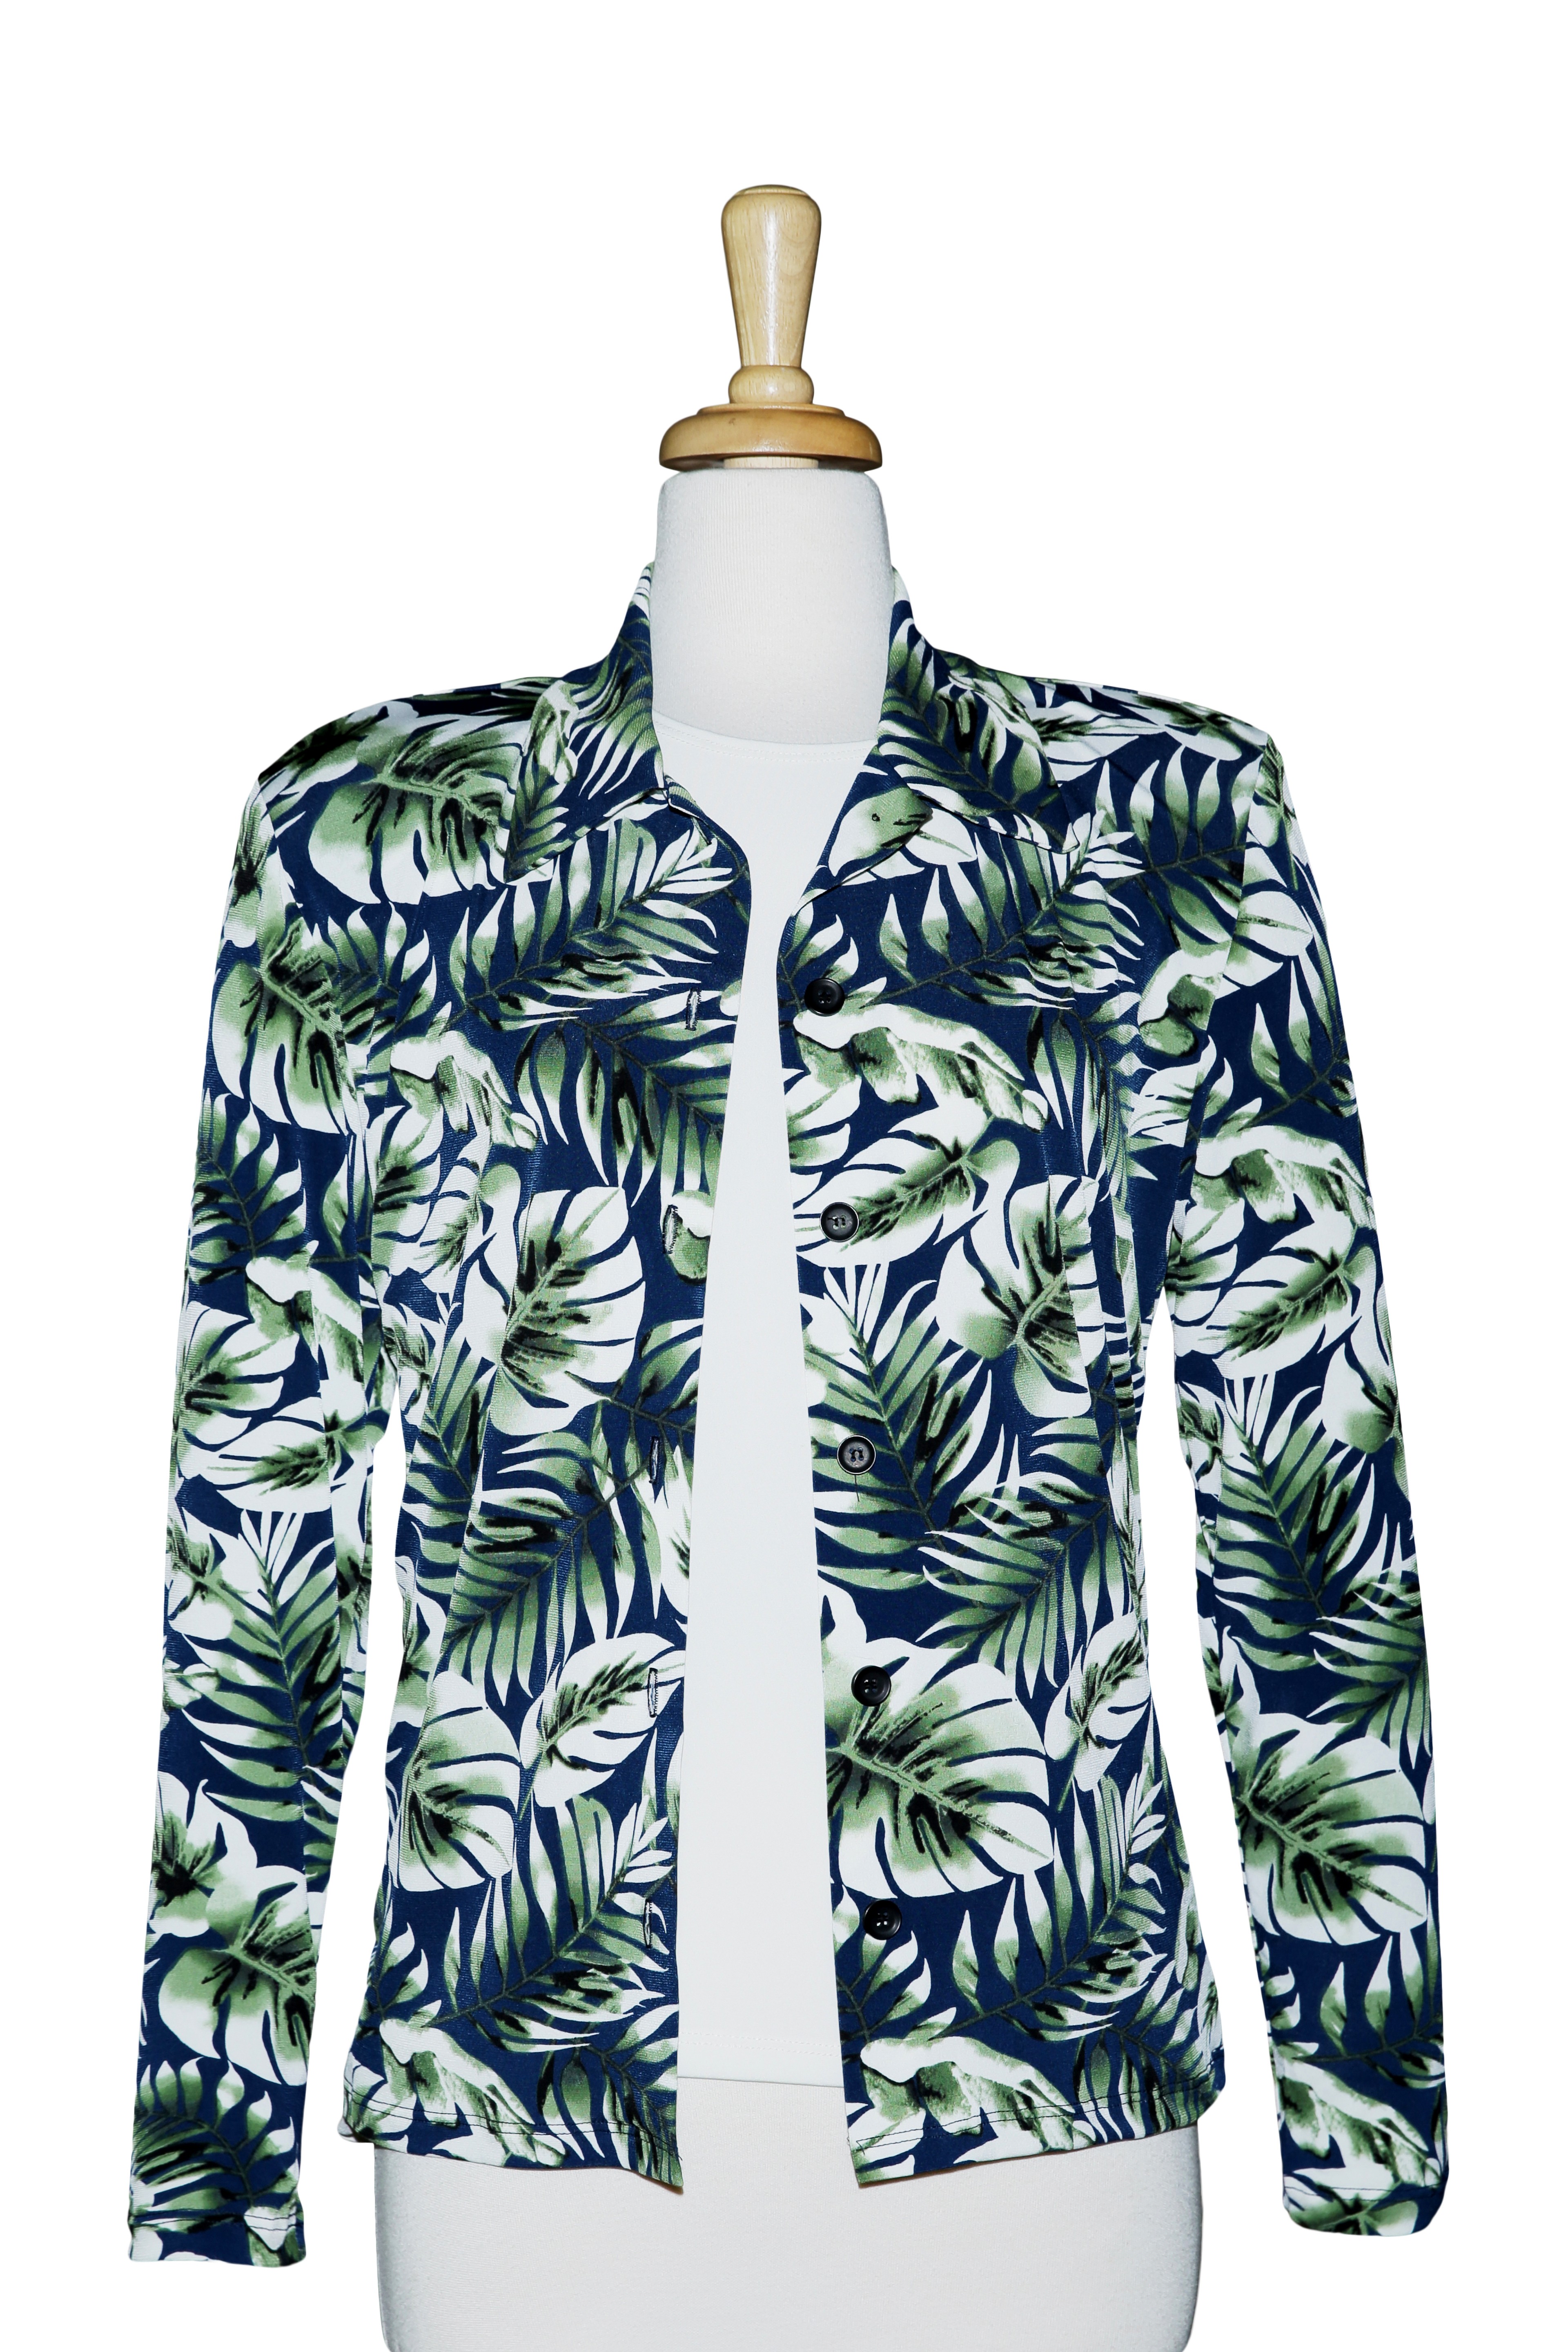  Navy, White, And Green Leaves Microfiber Jacket